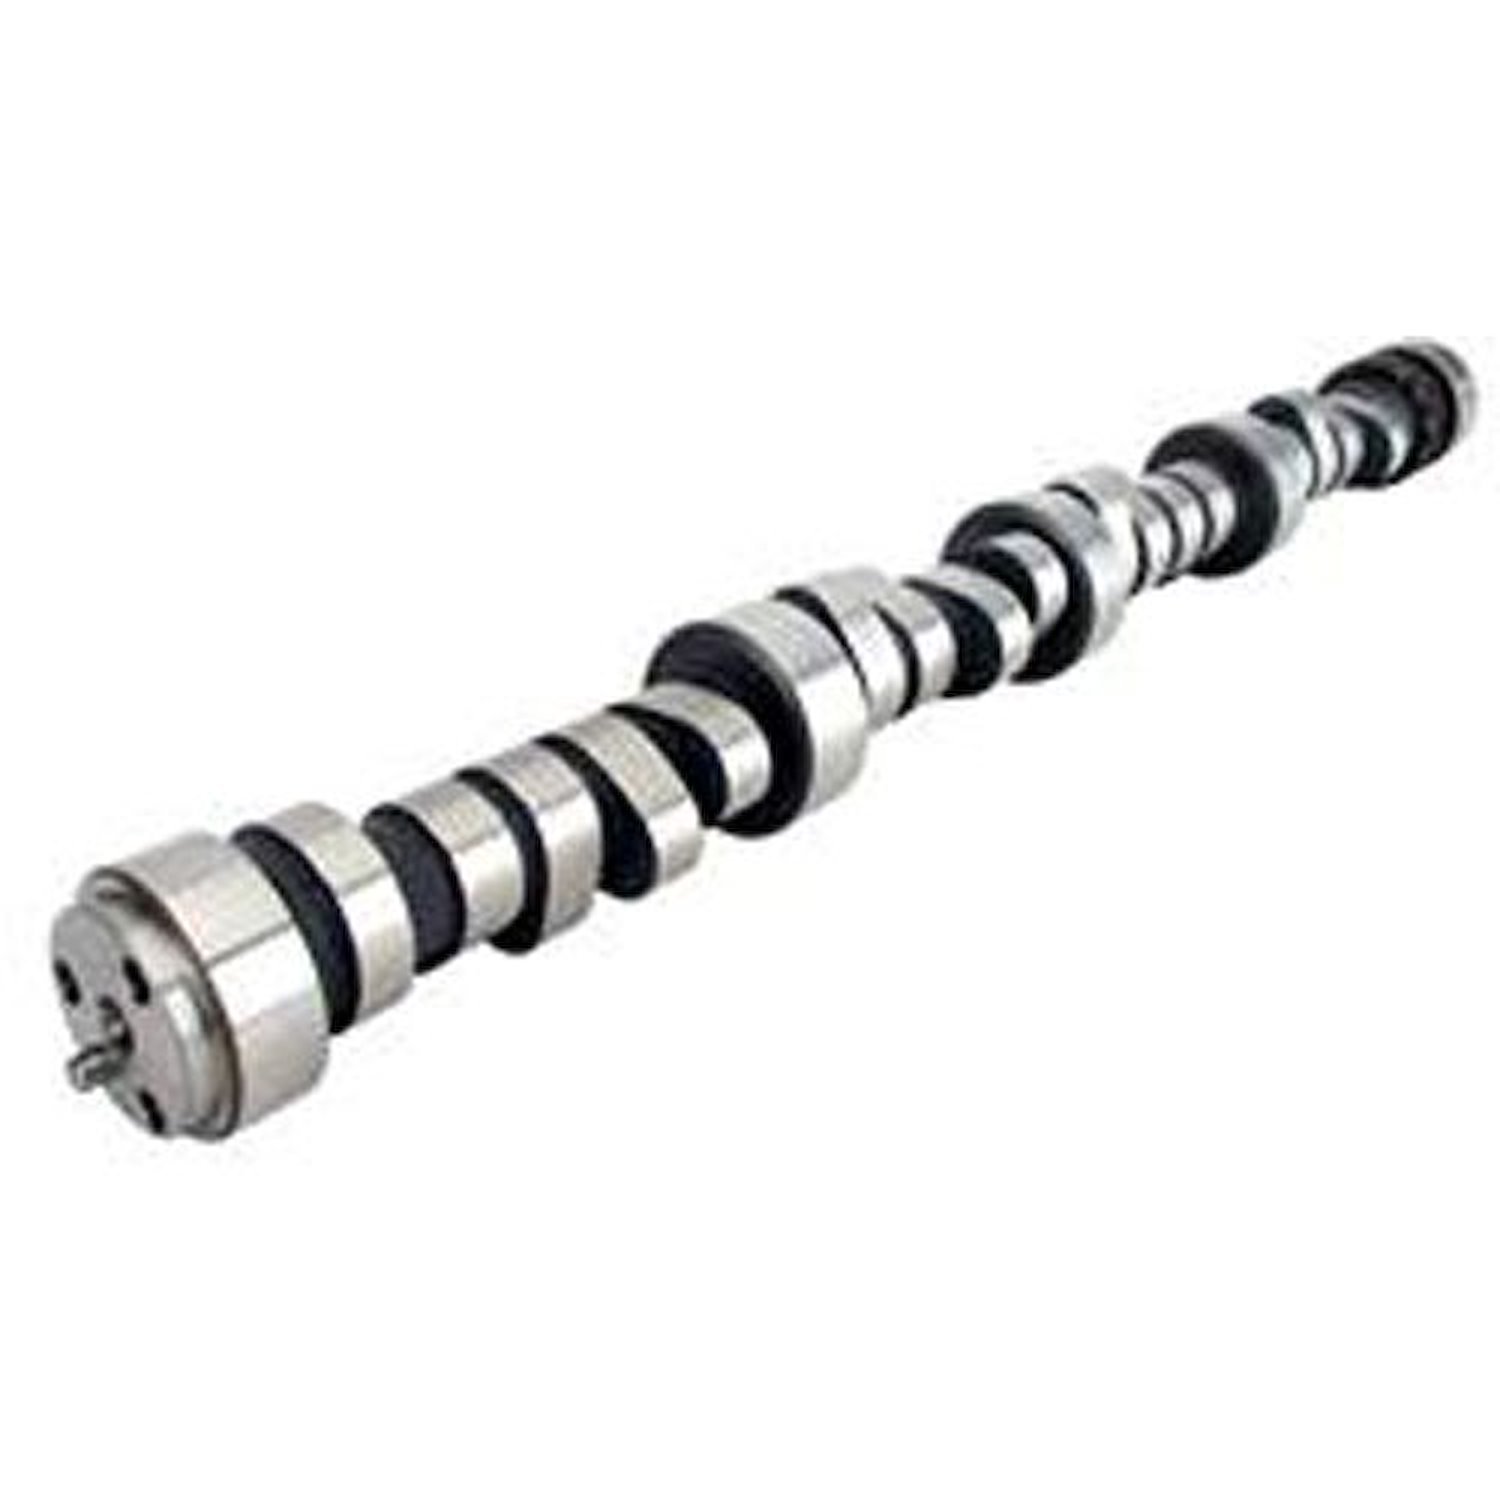 Big Mutha Thumpr Hydraulic Roller Camshaft Complete Kit